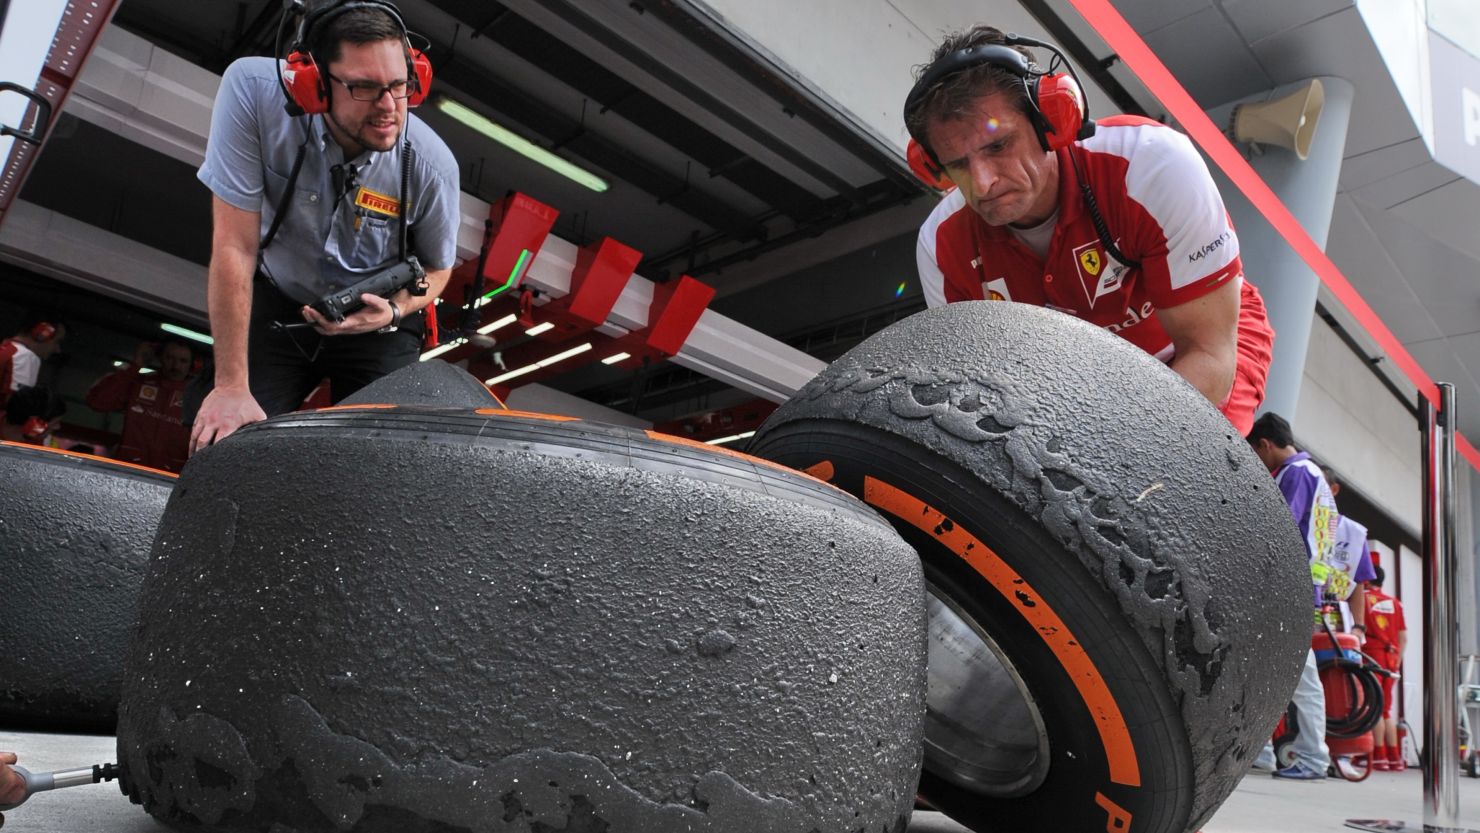 Formula One's 2013 tires supplied by Pirelli have come under intense scrunity in terms of performance and safety.